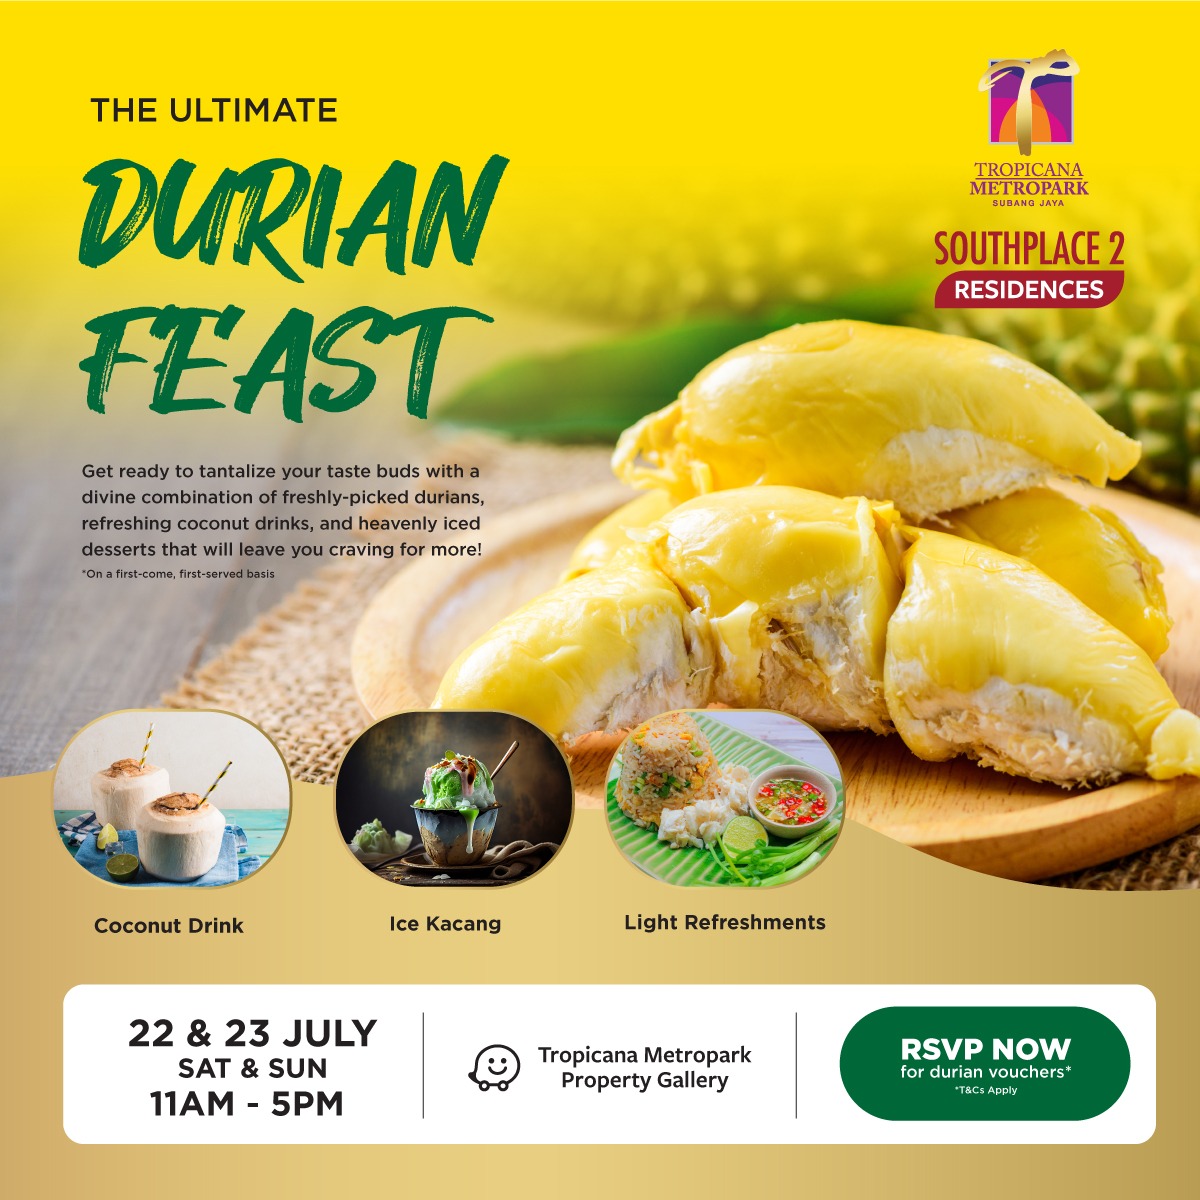 THE ULTIMATE DURIAN FEAST